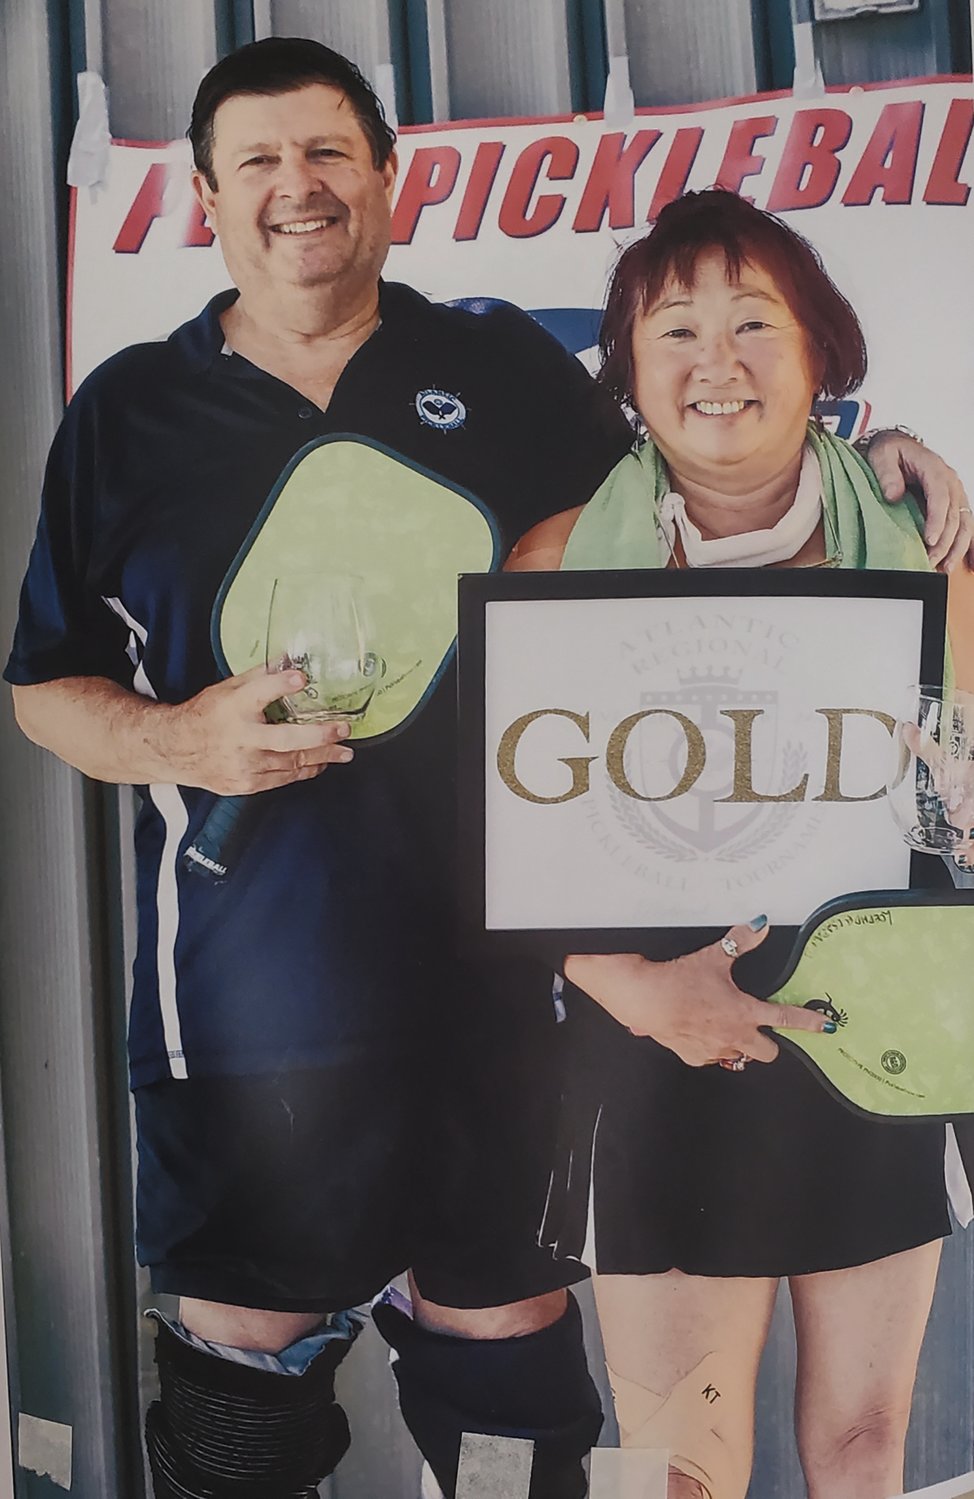 DYNAMIC DUO: Charlie Einsiedler and his wife Linda after winning the Atlantic Regional in mixed doubles for their age group. (Submitted photos)